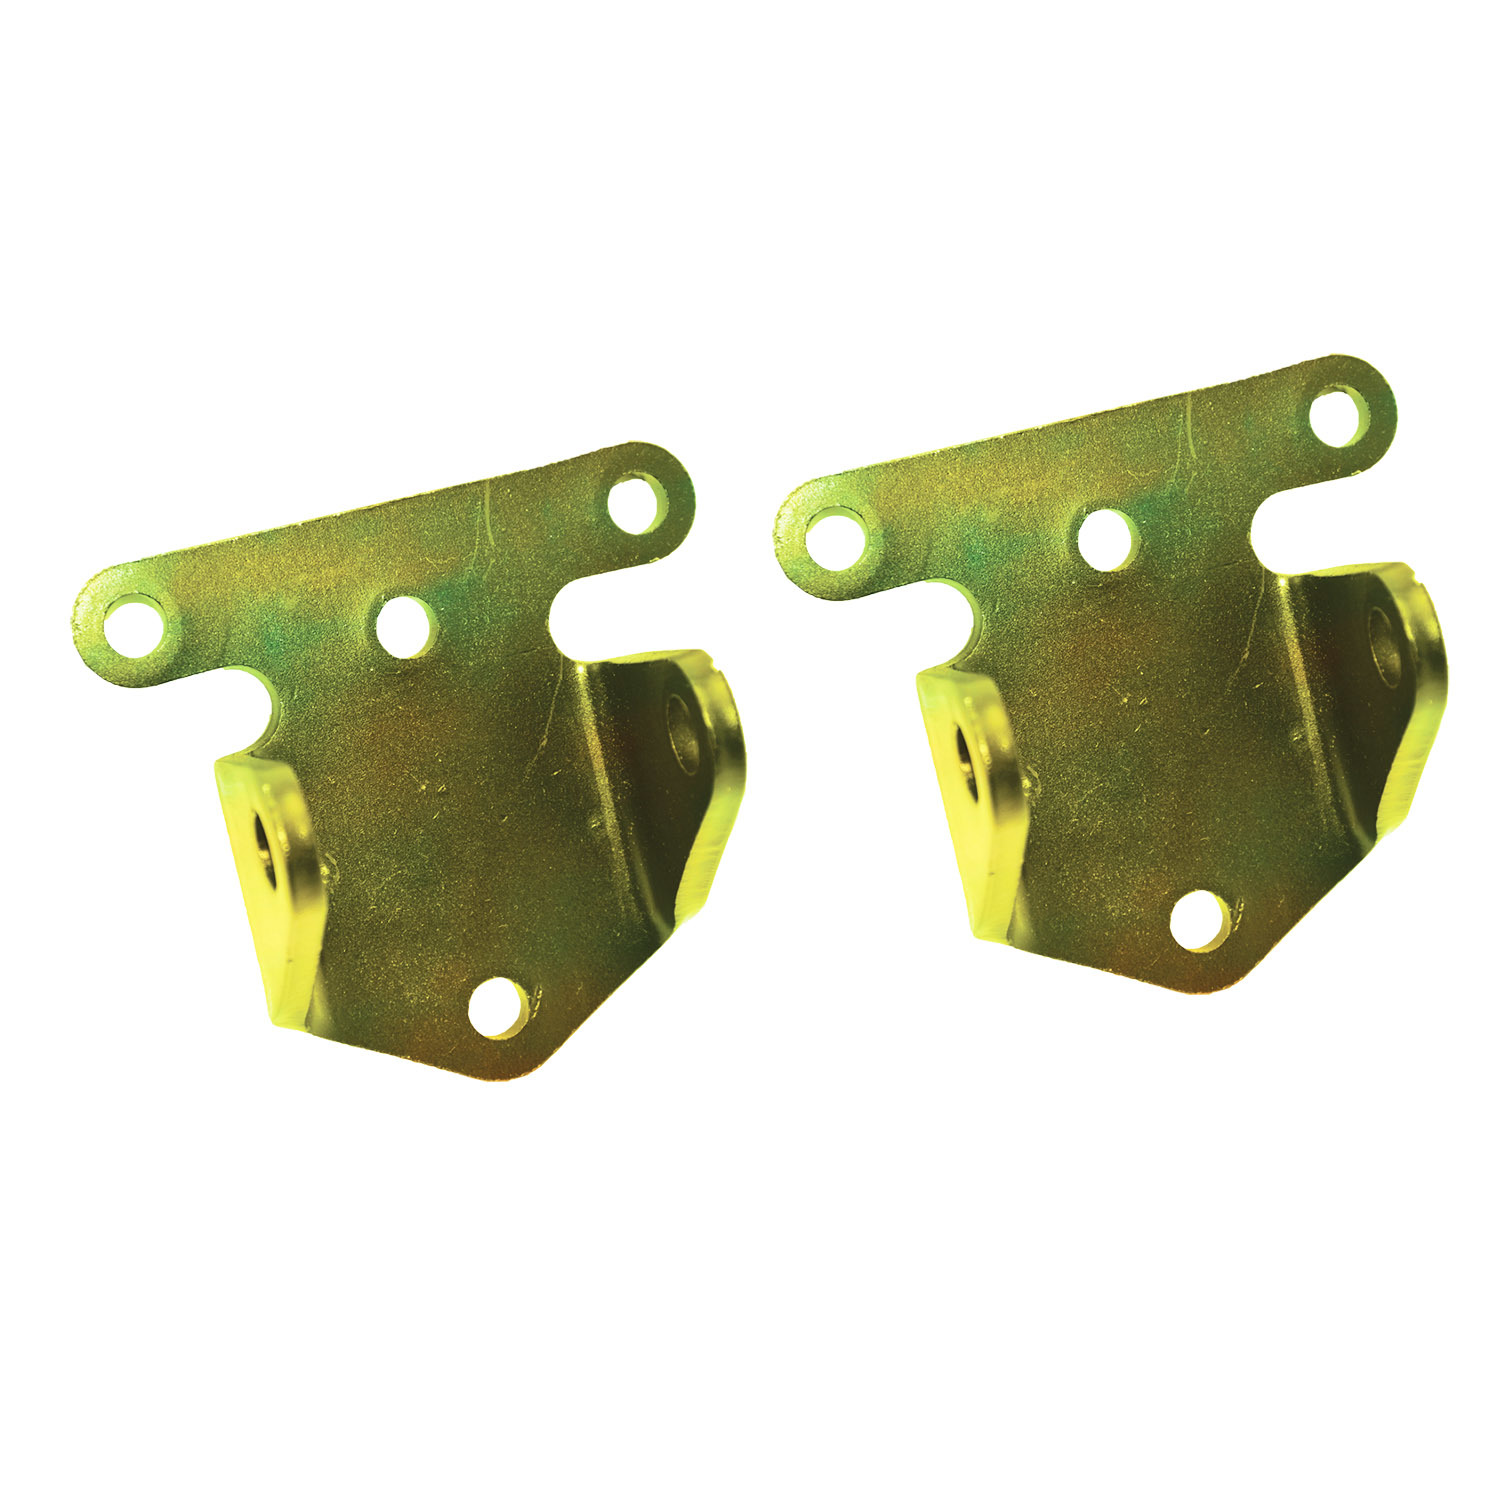 Specialty Products 3304 Motor Mount, Solid Mount, Bolt-On, Steel, Cadmium Plated, Small Block Chevy, Pair